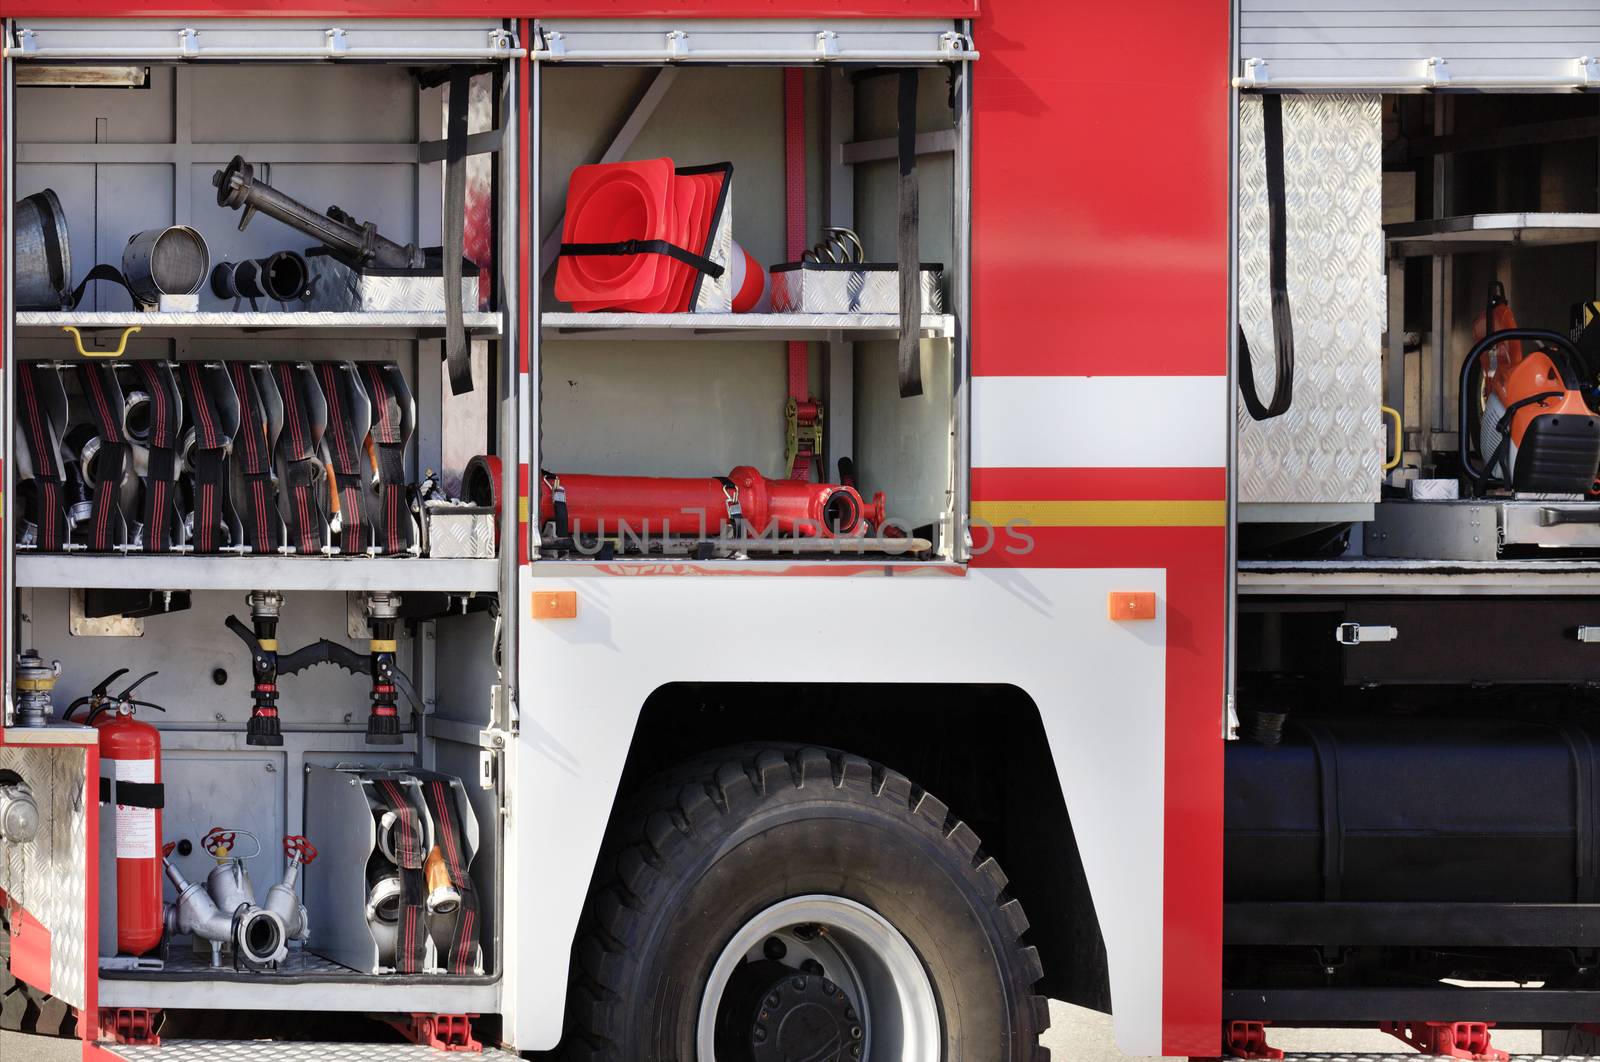 Fire hoses, valves and cranes, transport cones, manual fire extinguishers are located in the cargo compartment of an equipped fire truck. by Sergii